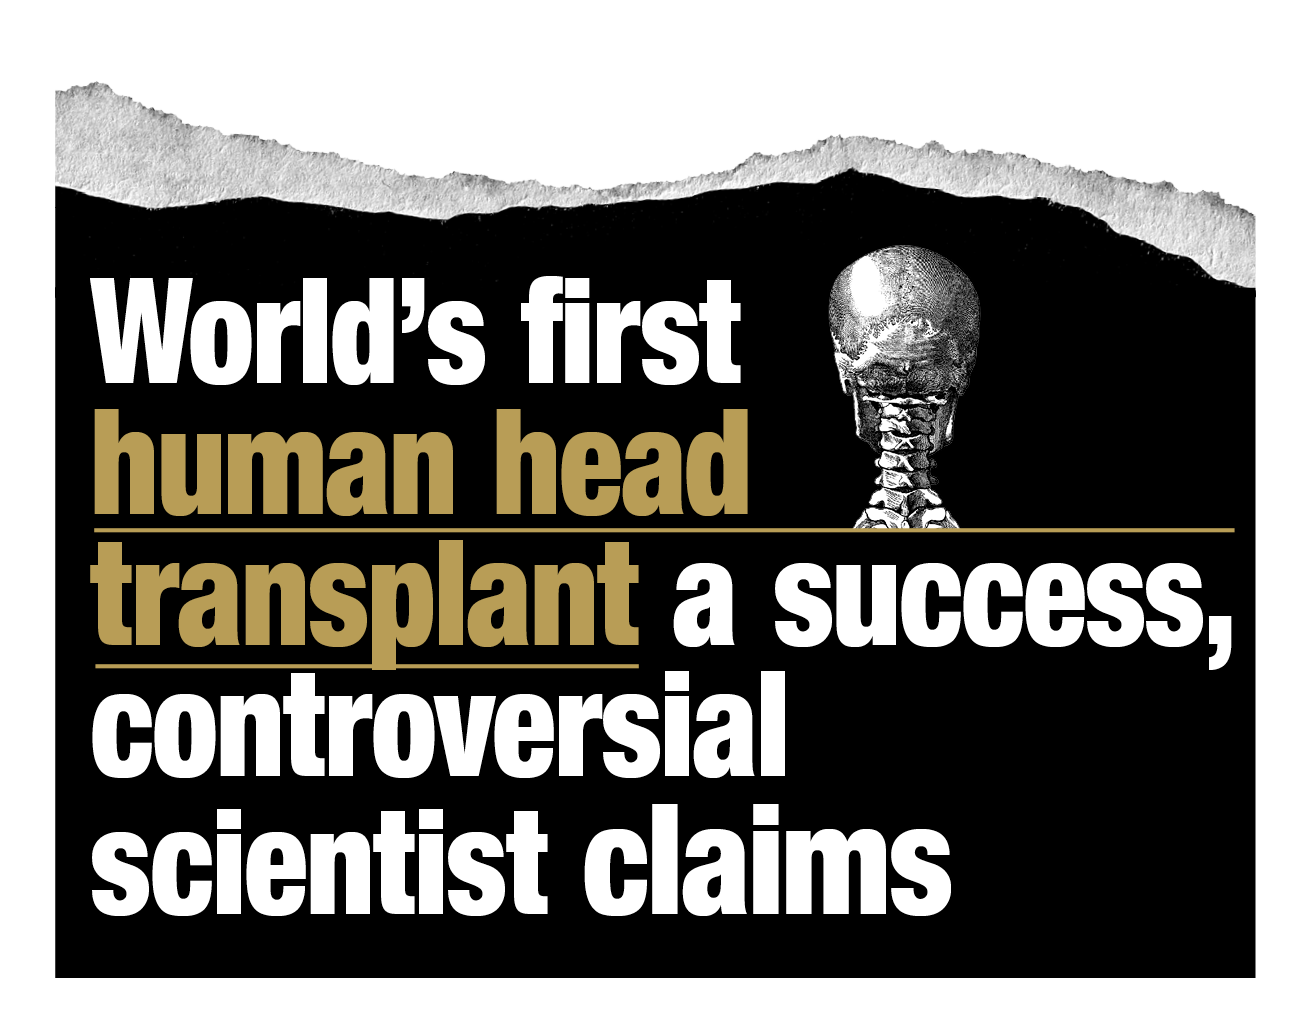 World's first human head transplant a success, controversial scientist claims